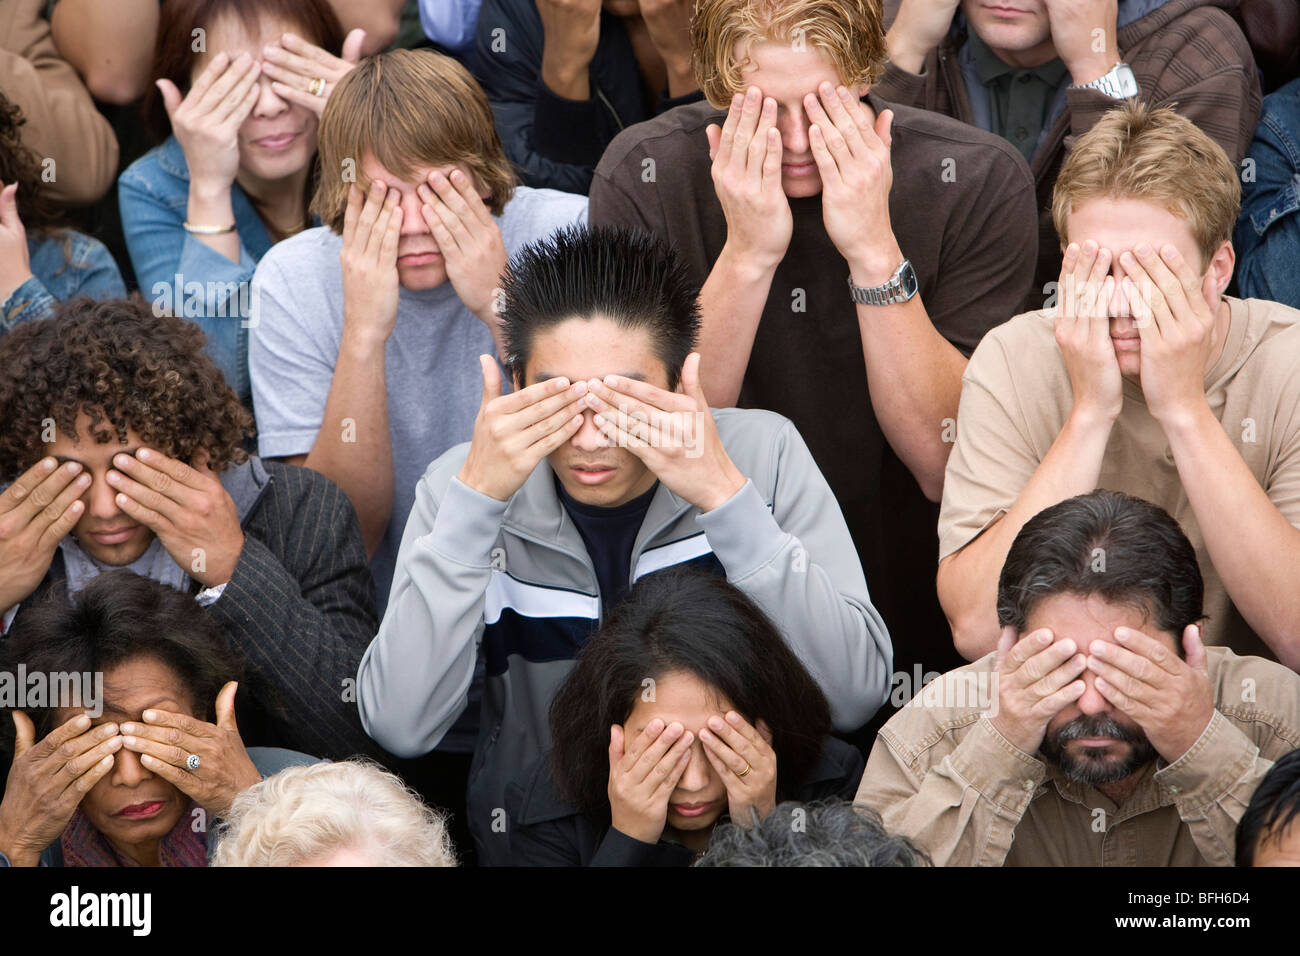 Crowd covering eyes Stock Photo